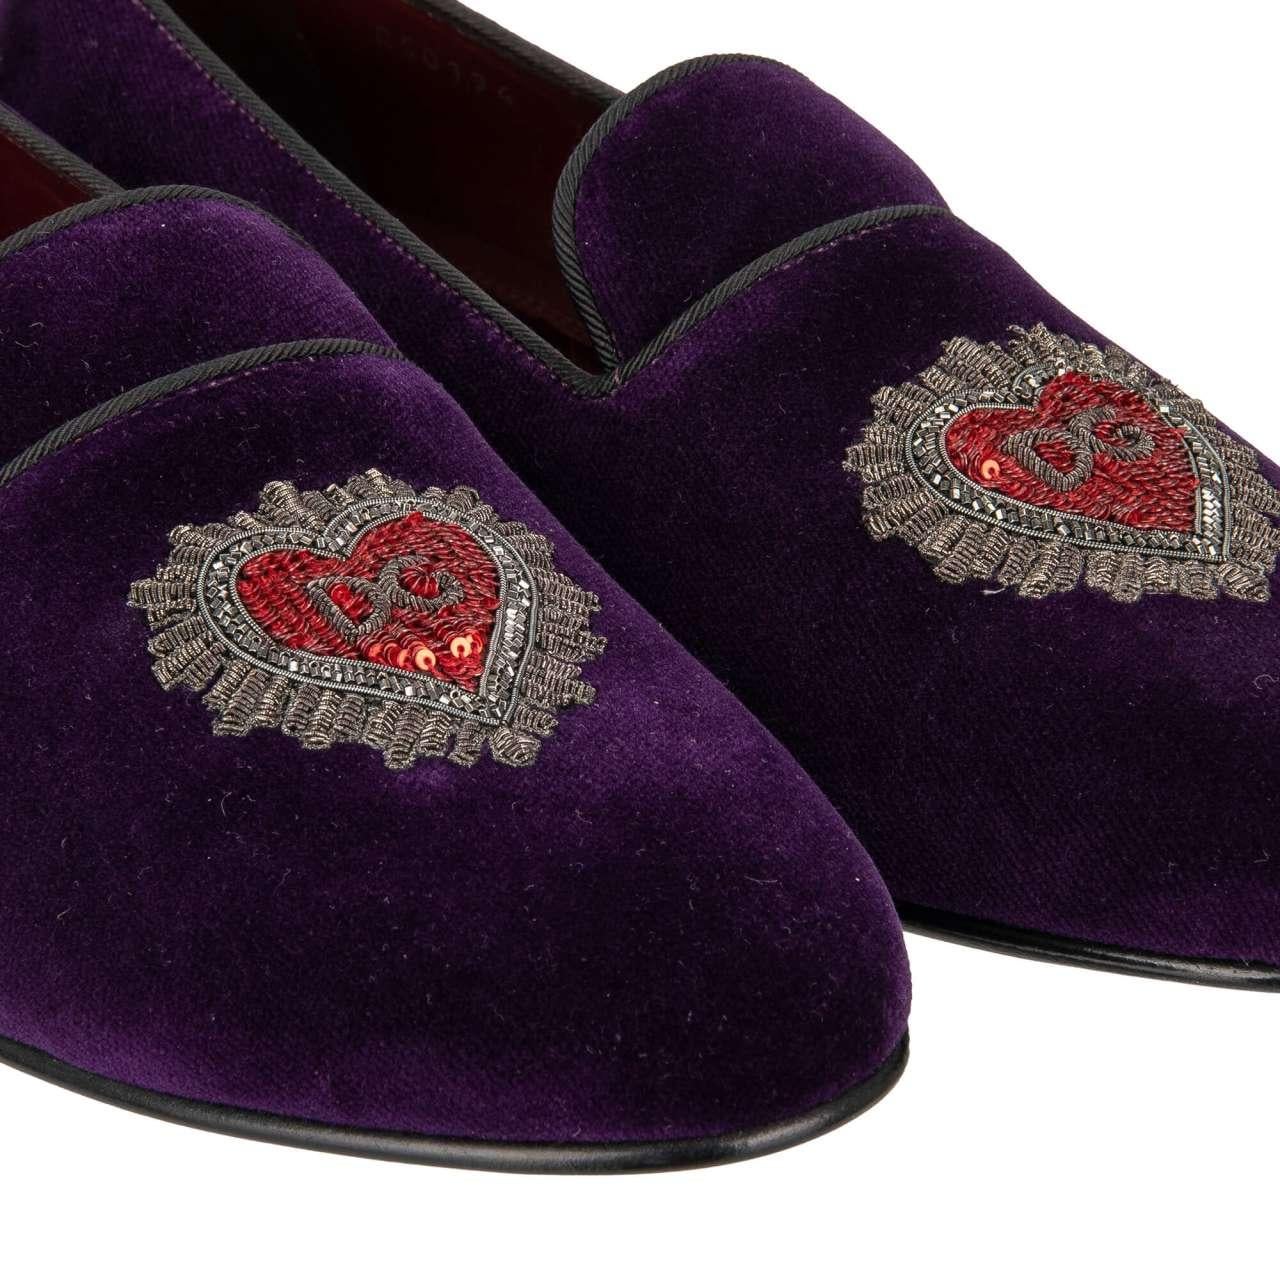 D&G - Heart Logo Embroidered Velvet Loafer YOUNG POPE Purple Red EUR 41 In Excellent Condition For Sale In Erkrath, DE